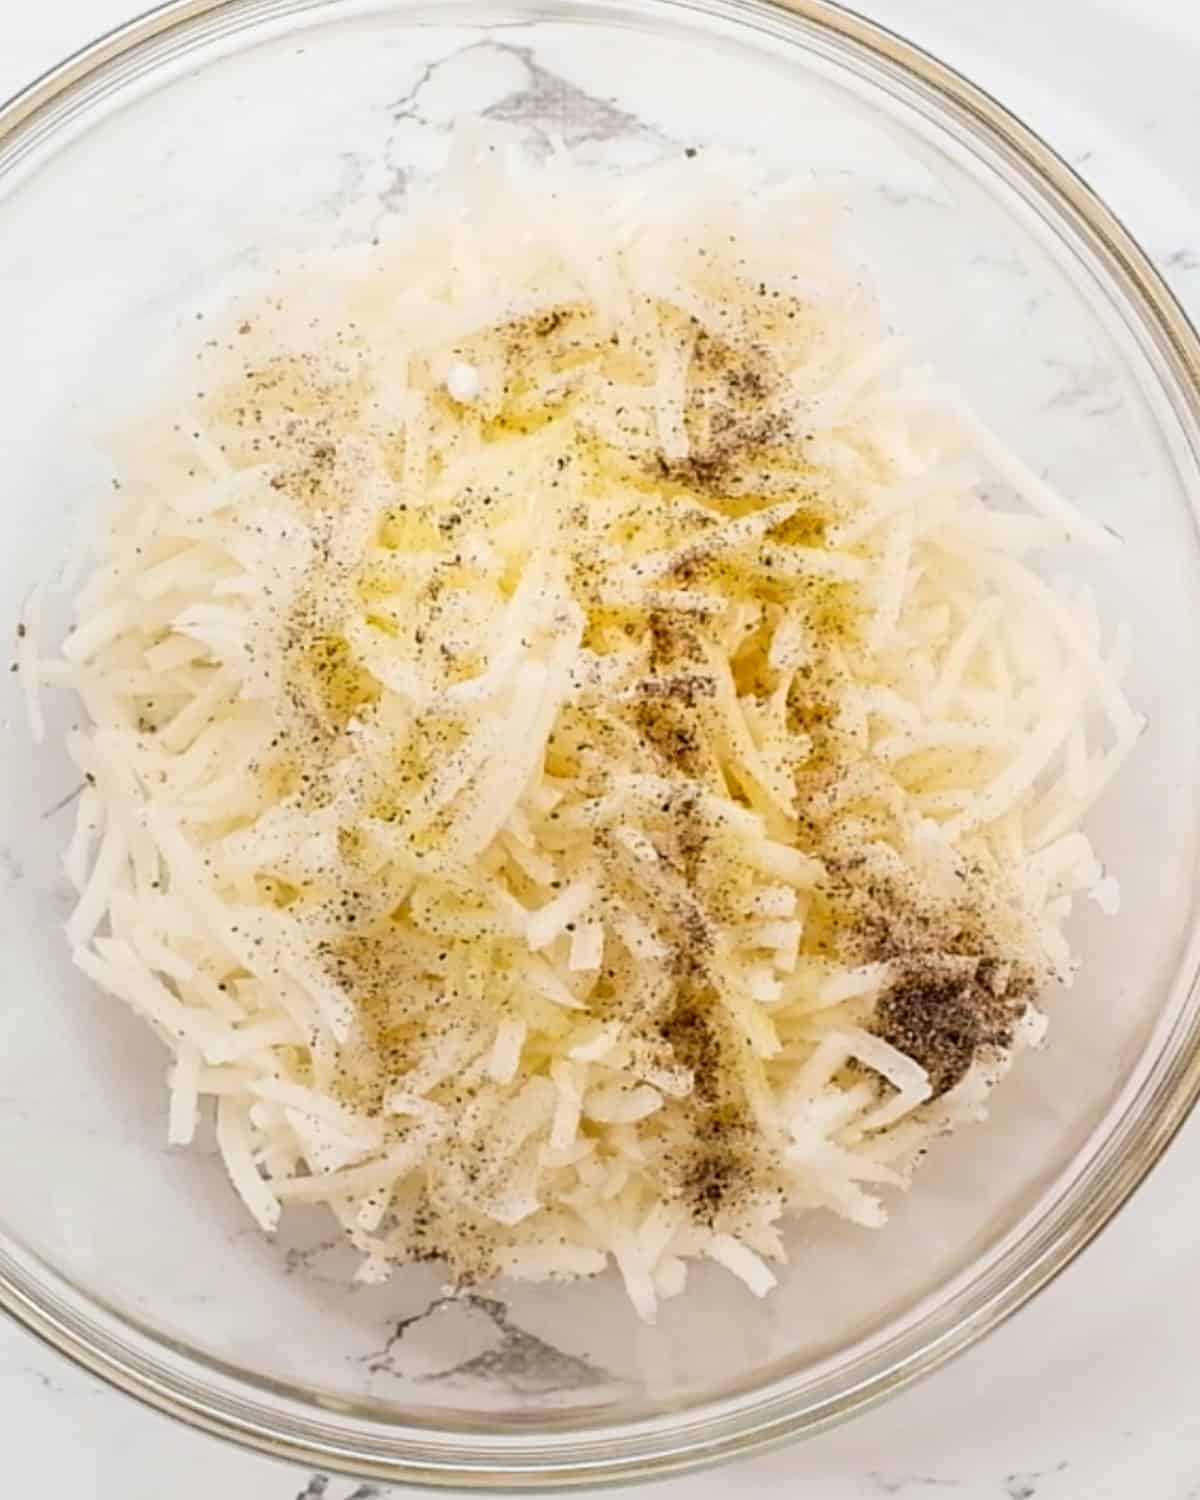 Hash Brown Crust ingredients in a bowl before mixing